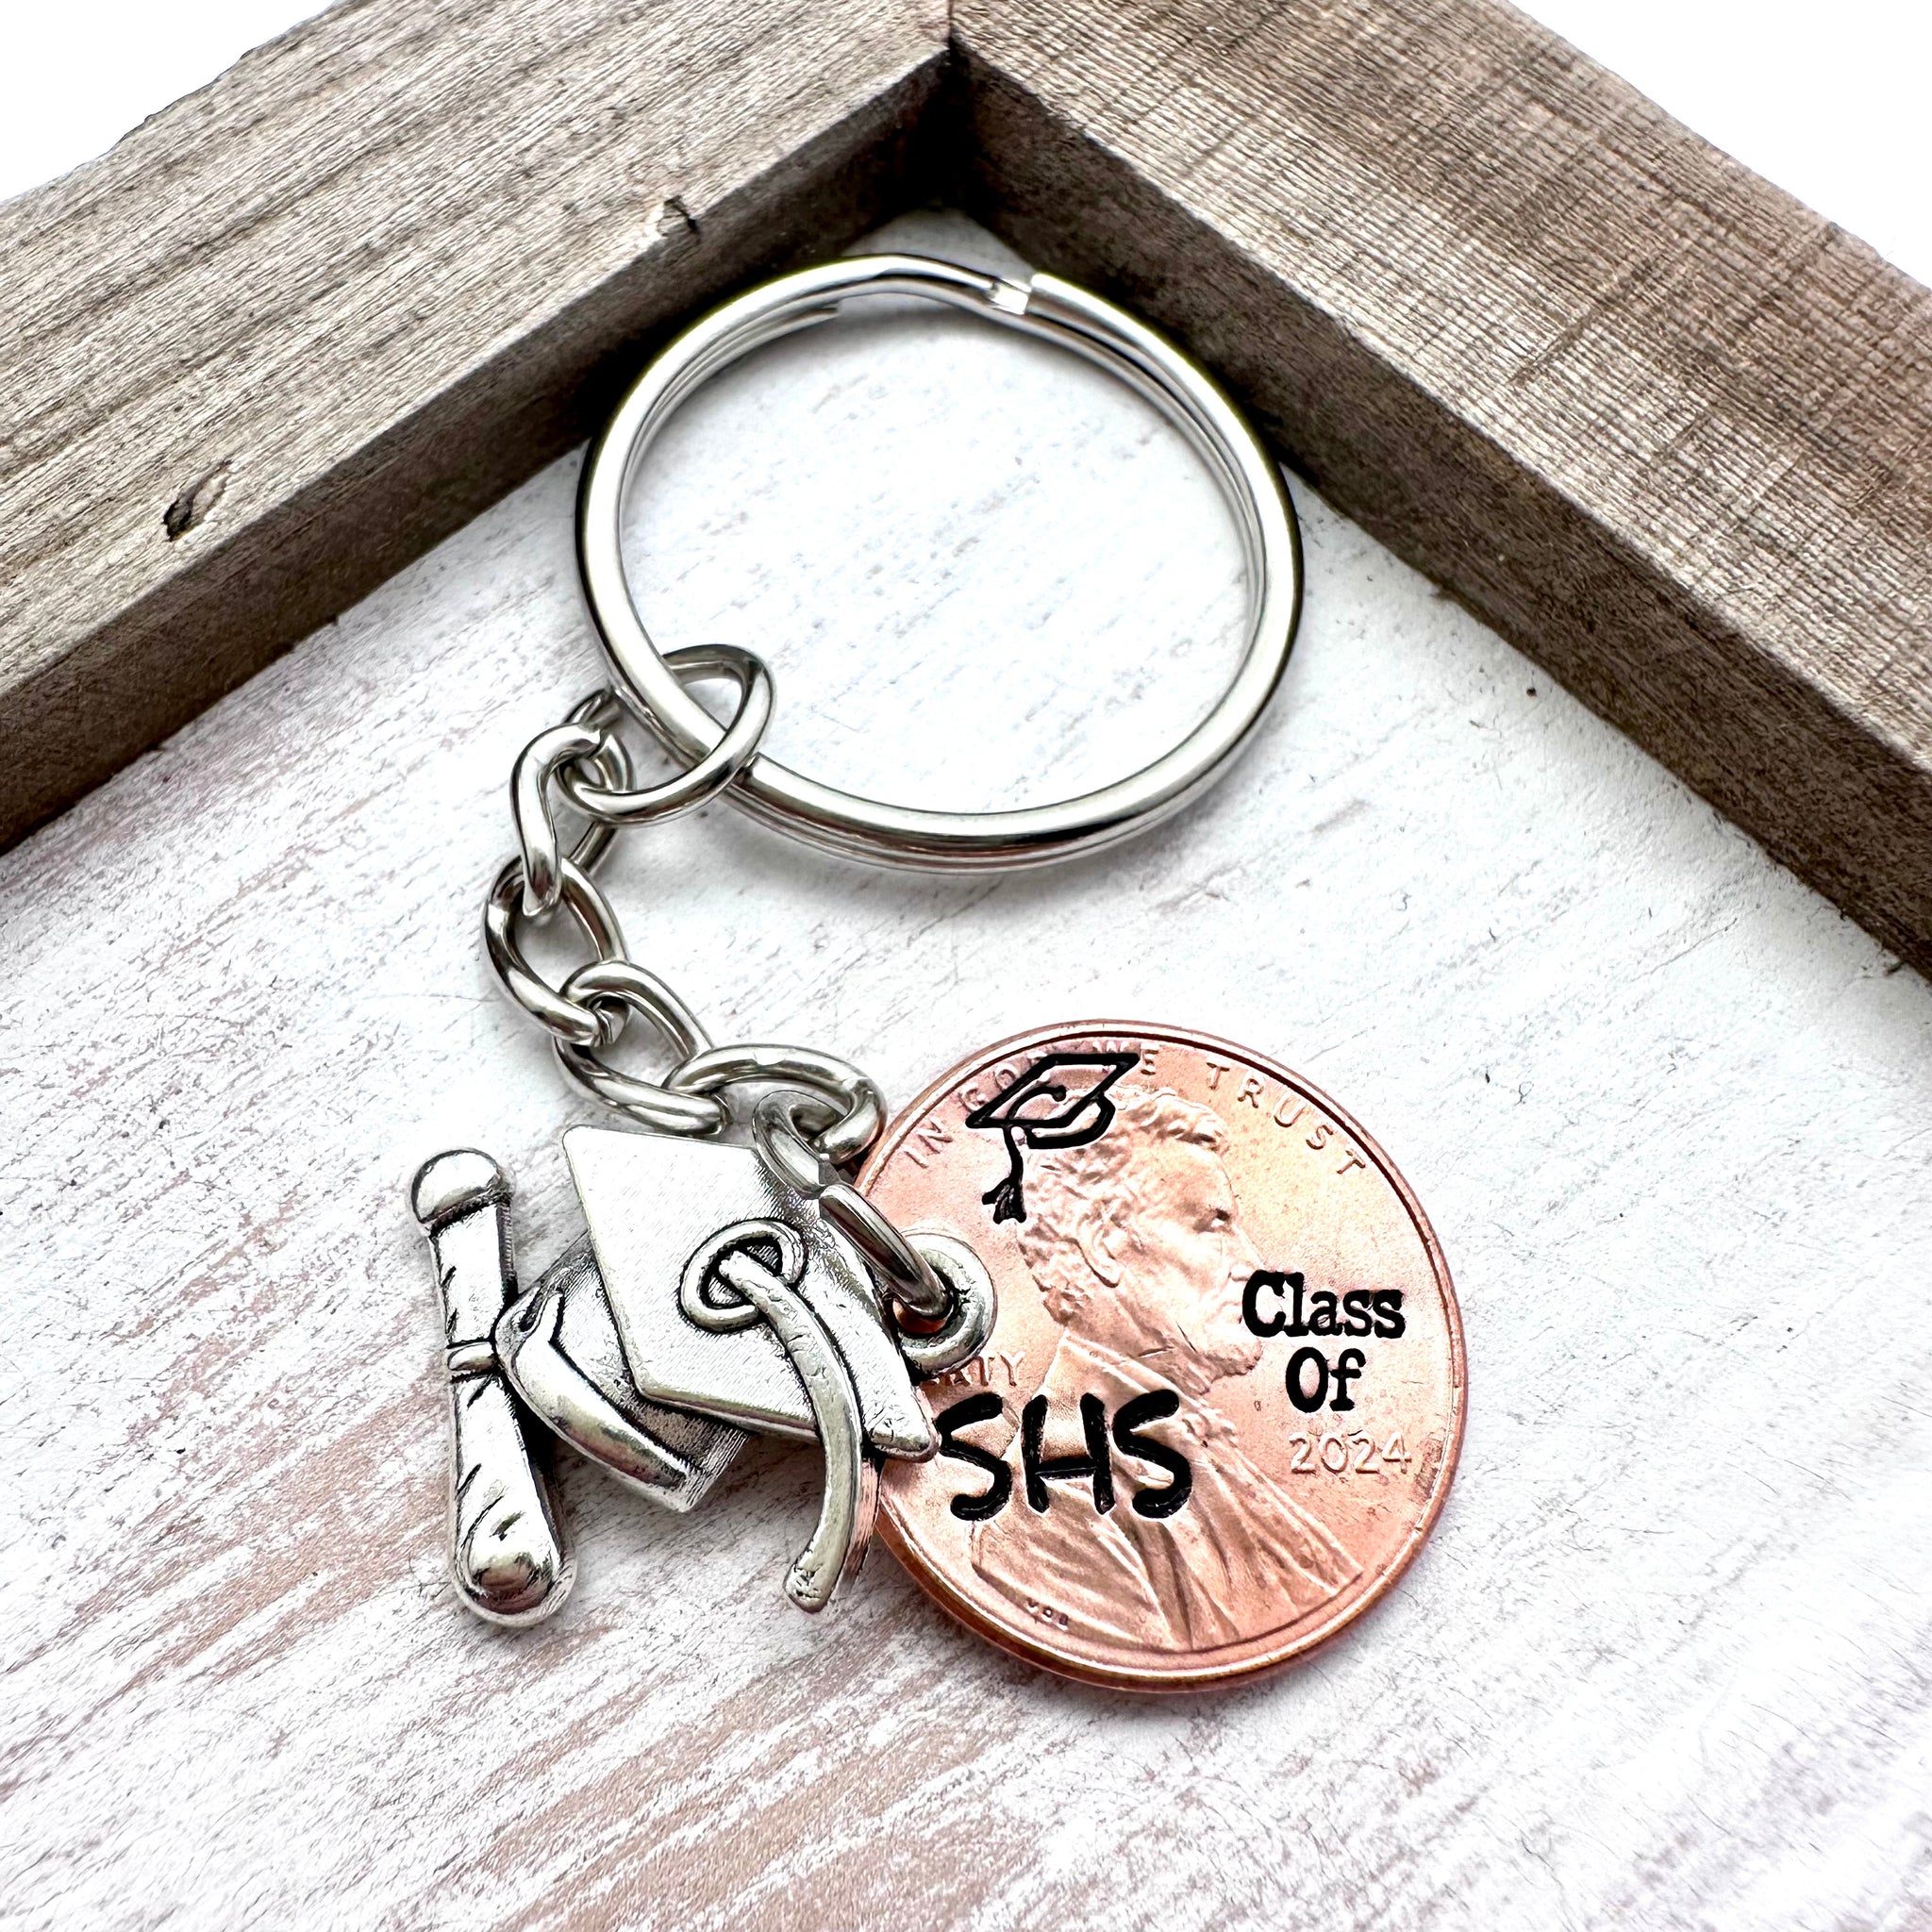 Class of 2024 Graduation Keychain - Hand-Stamped Lucky Penny